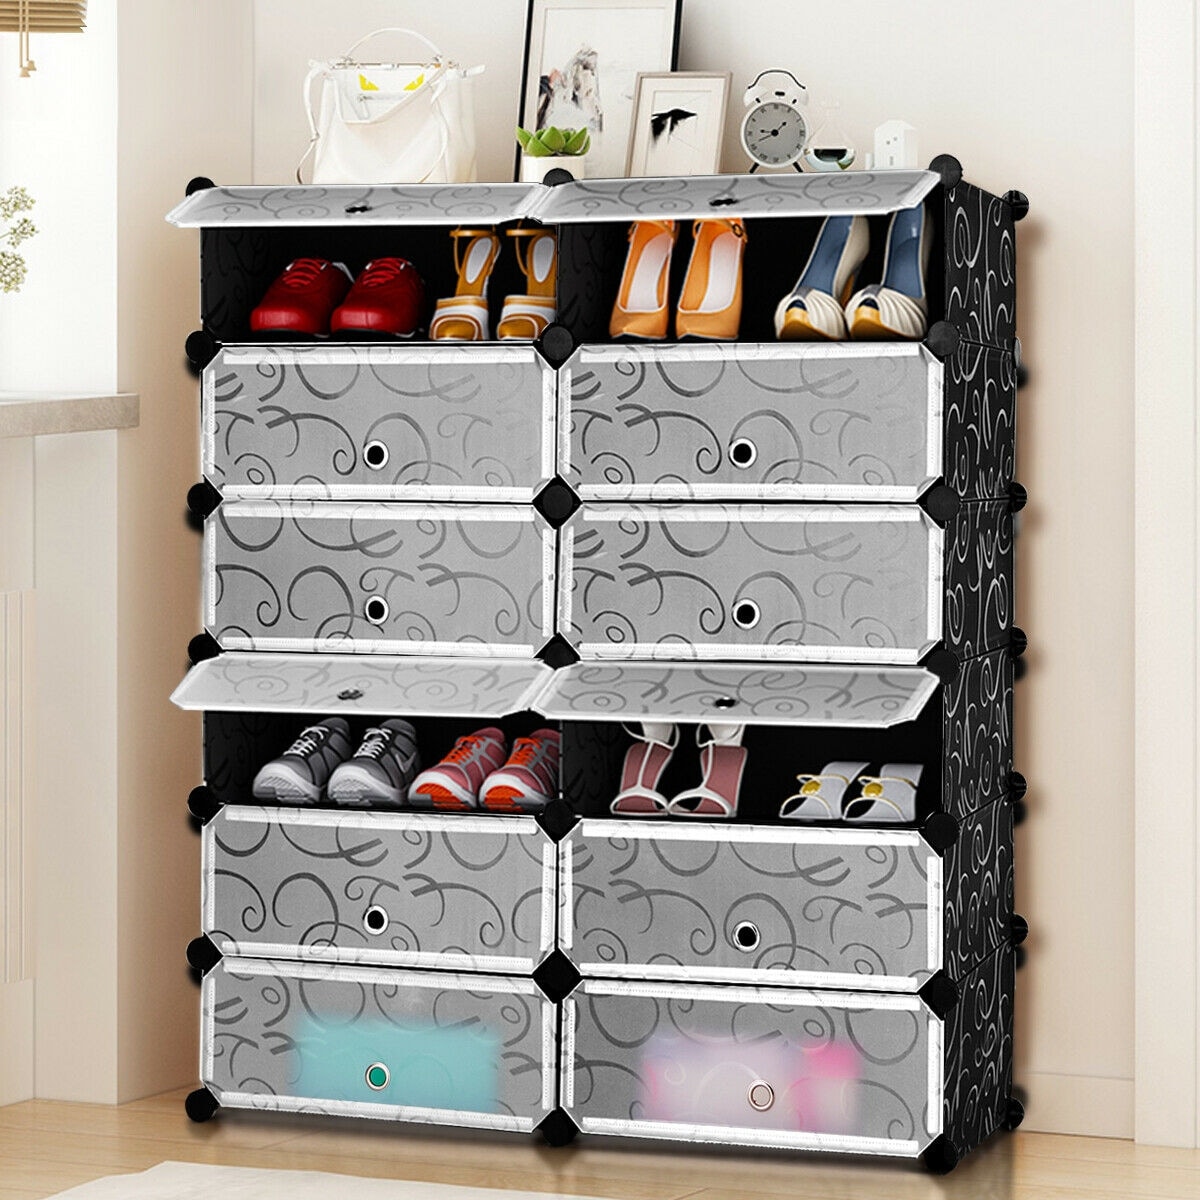  CUBEDIY Shoe Organizer Cabinet Up to 72 Pairs, Shoe  Closet-Portable Closed Shoe Rack with See-Through Door (Clear, Plastic,  Stackable) Cubby Shoes Organizer with Covers, Hooks & Pockets, White : Home  